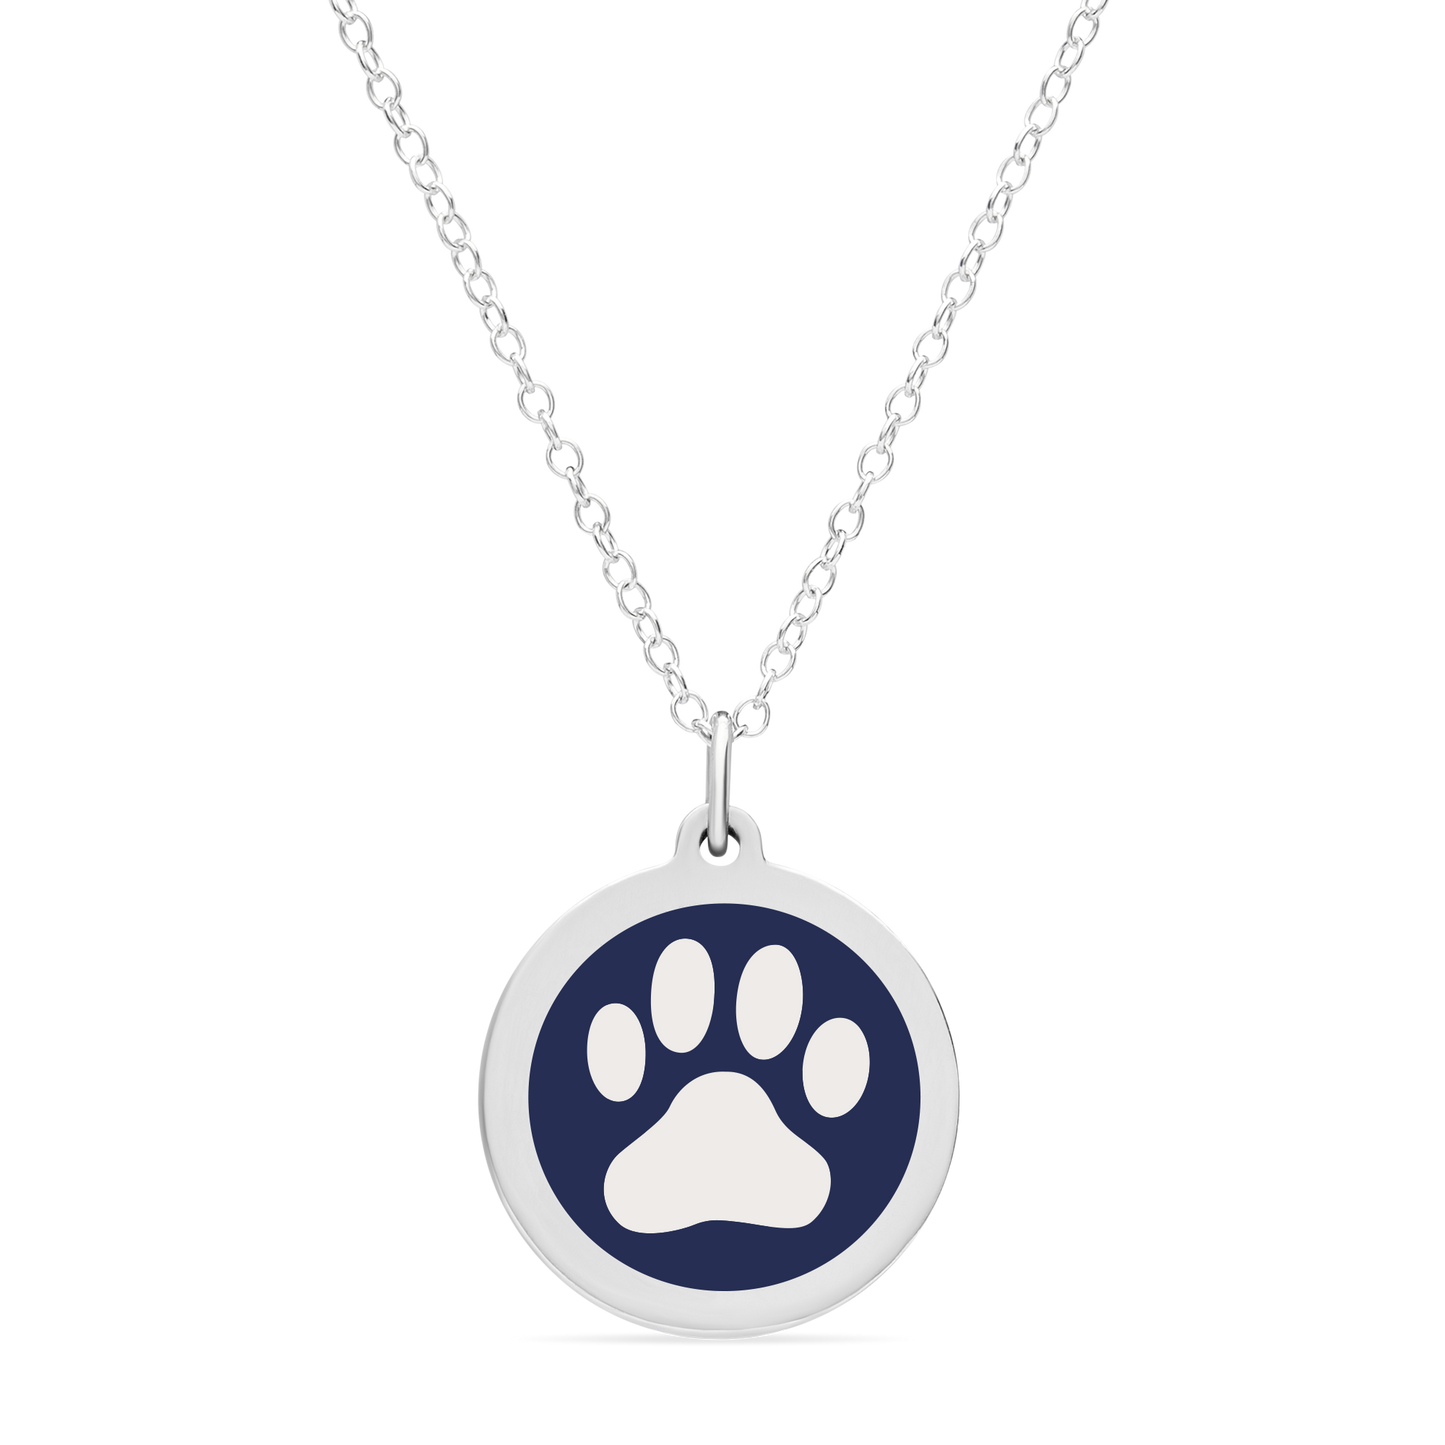 ORIGINAL PAW PRINT CHARM in sterling silver with rhodium plate